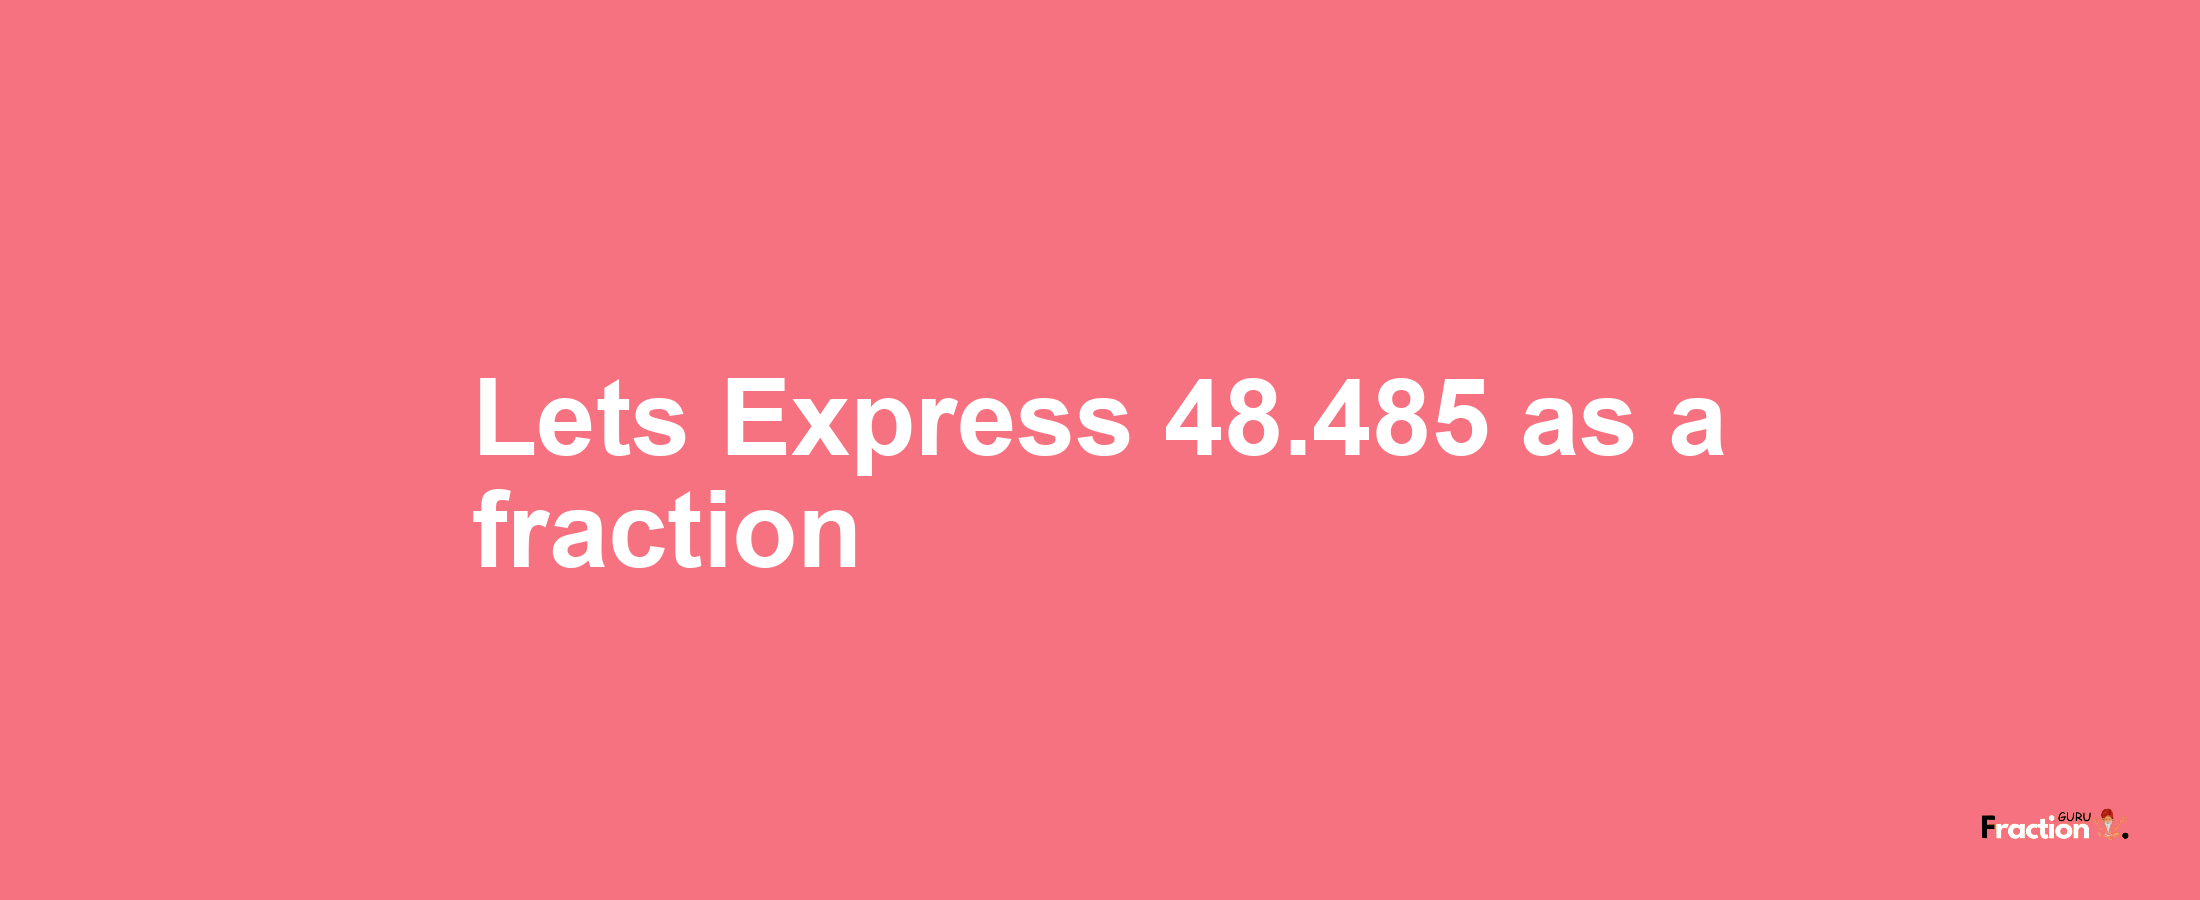 Lets Express 48.485 as afraction